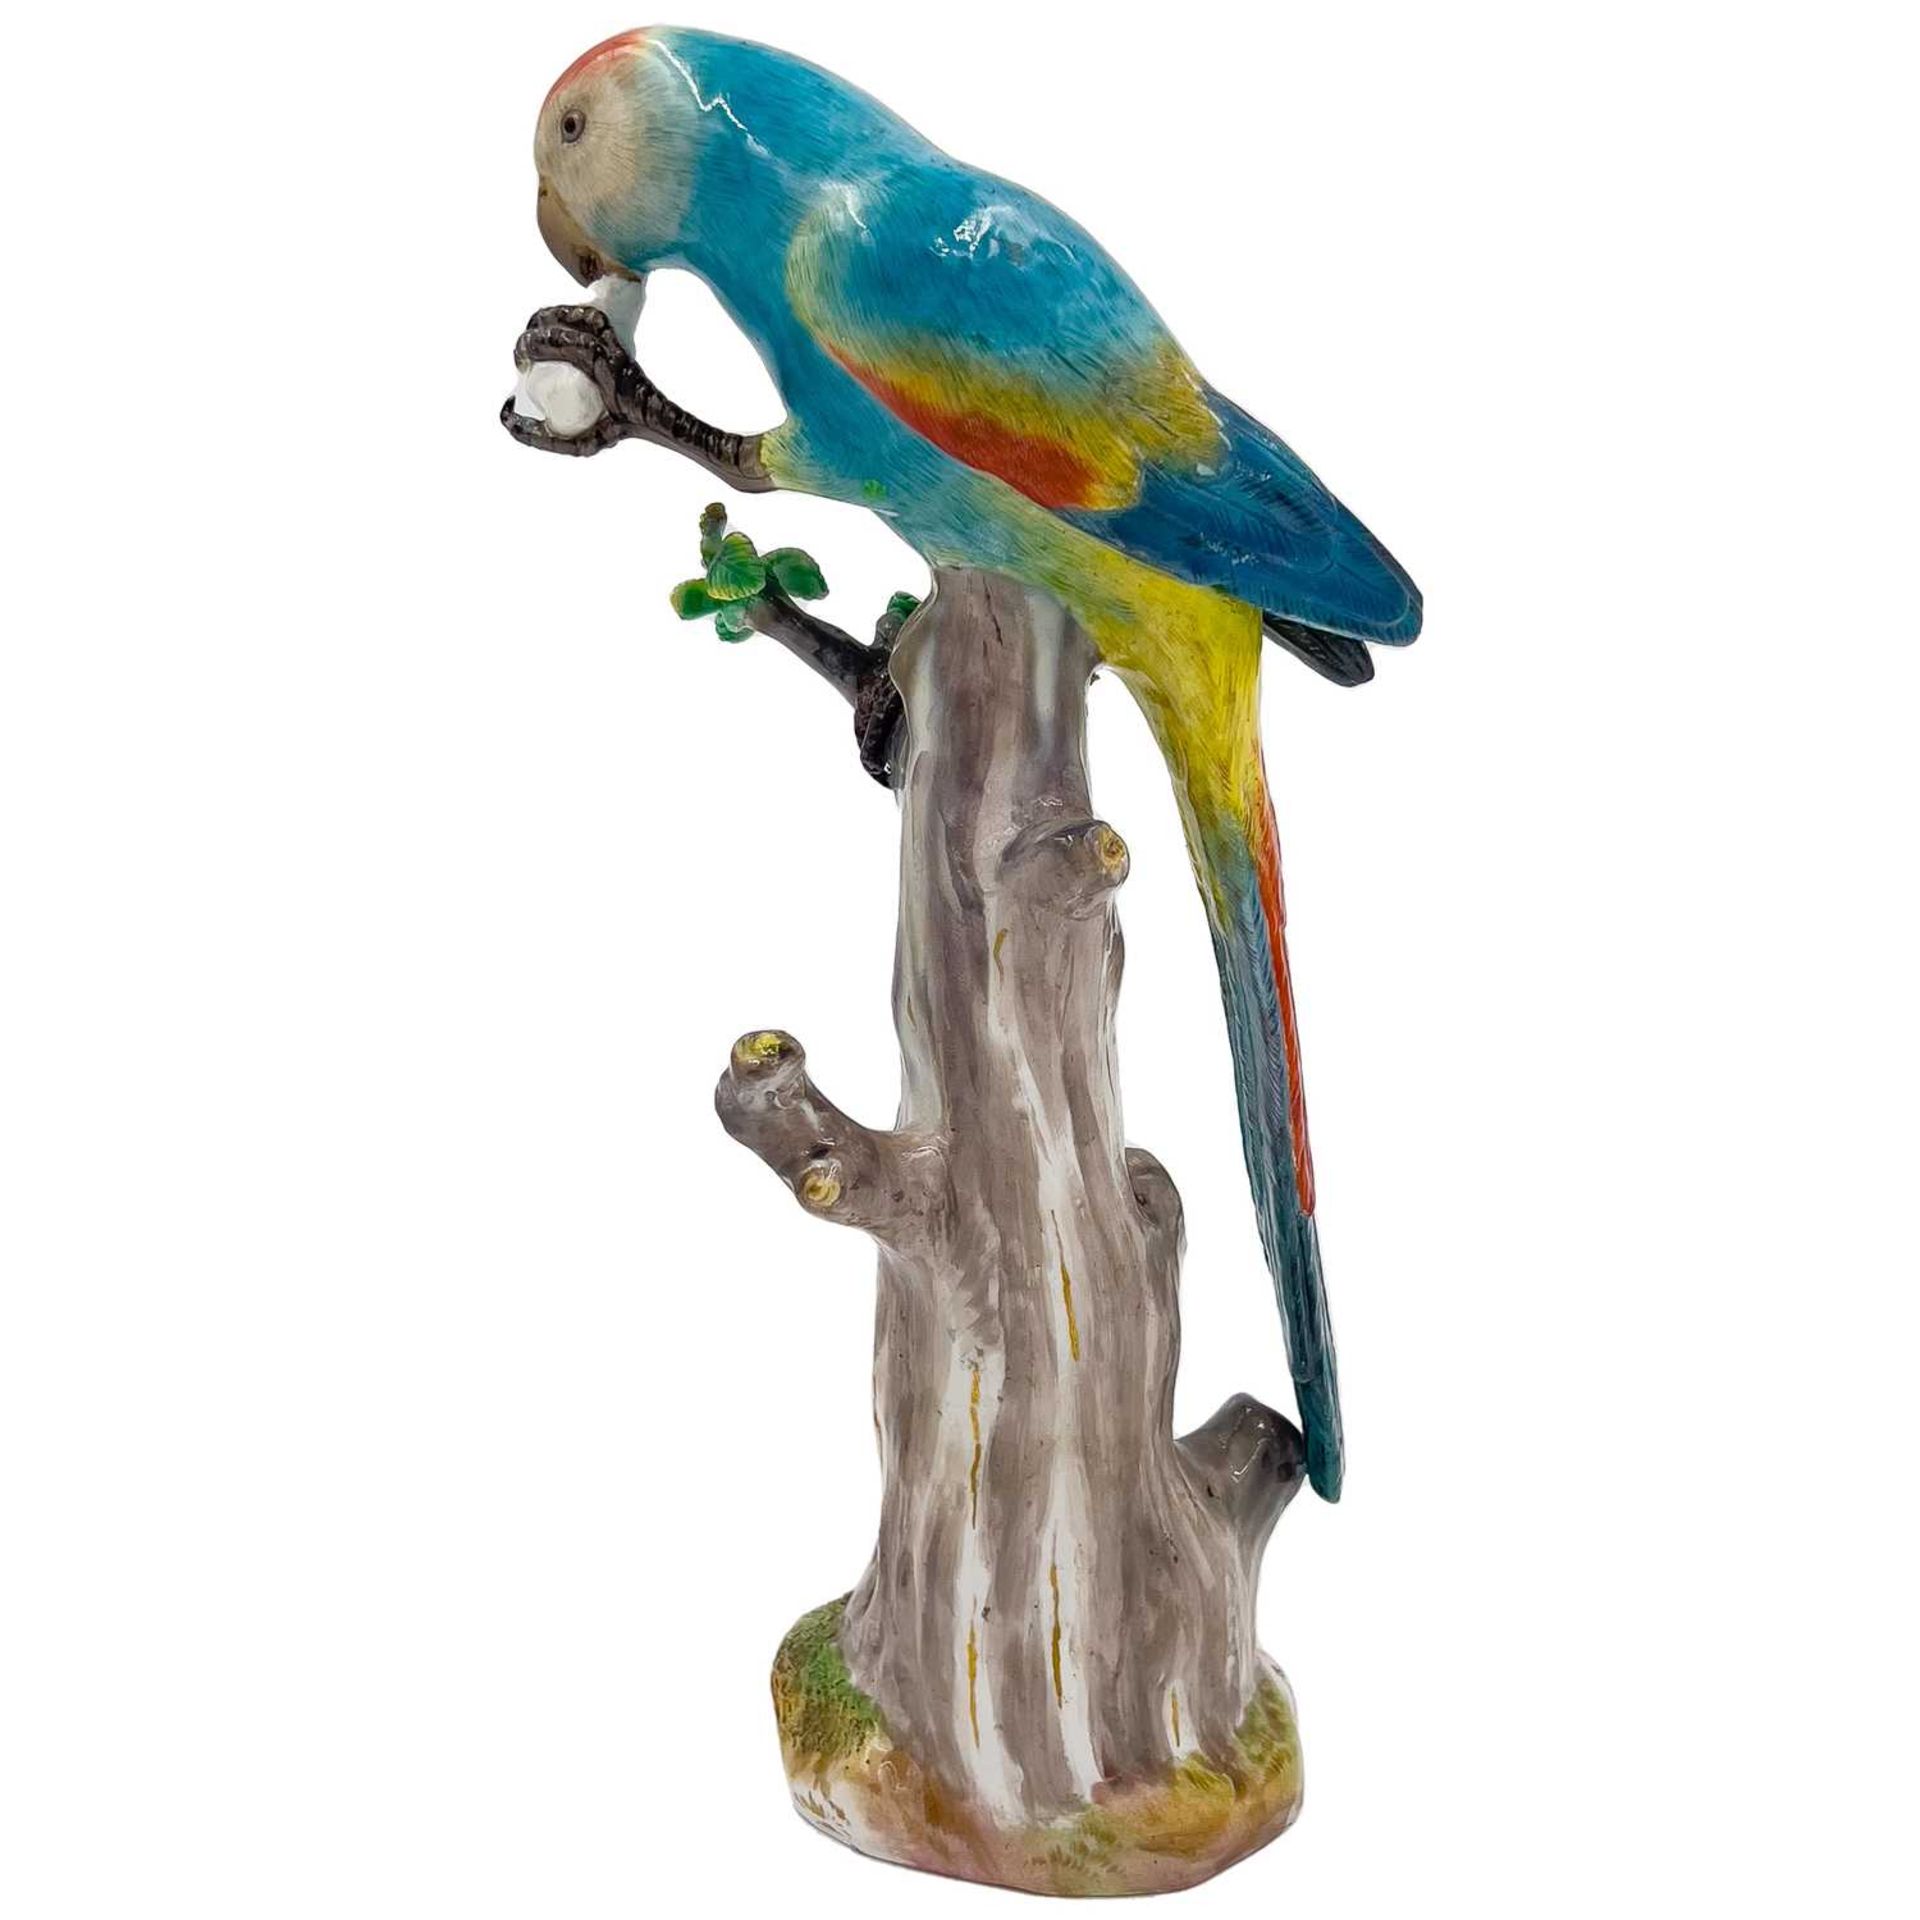 MEISSEN: A 19TH CENTURY PORCELAIN MODEL OF A PARROT EATING FRUIT - Image 2 of 7